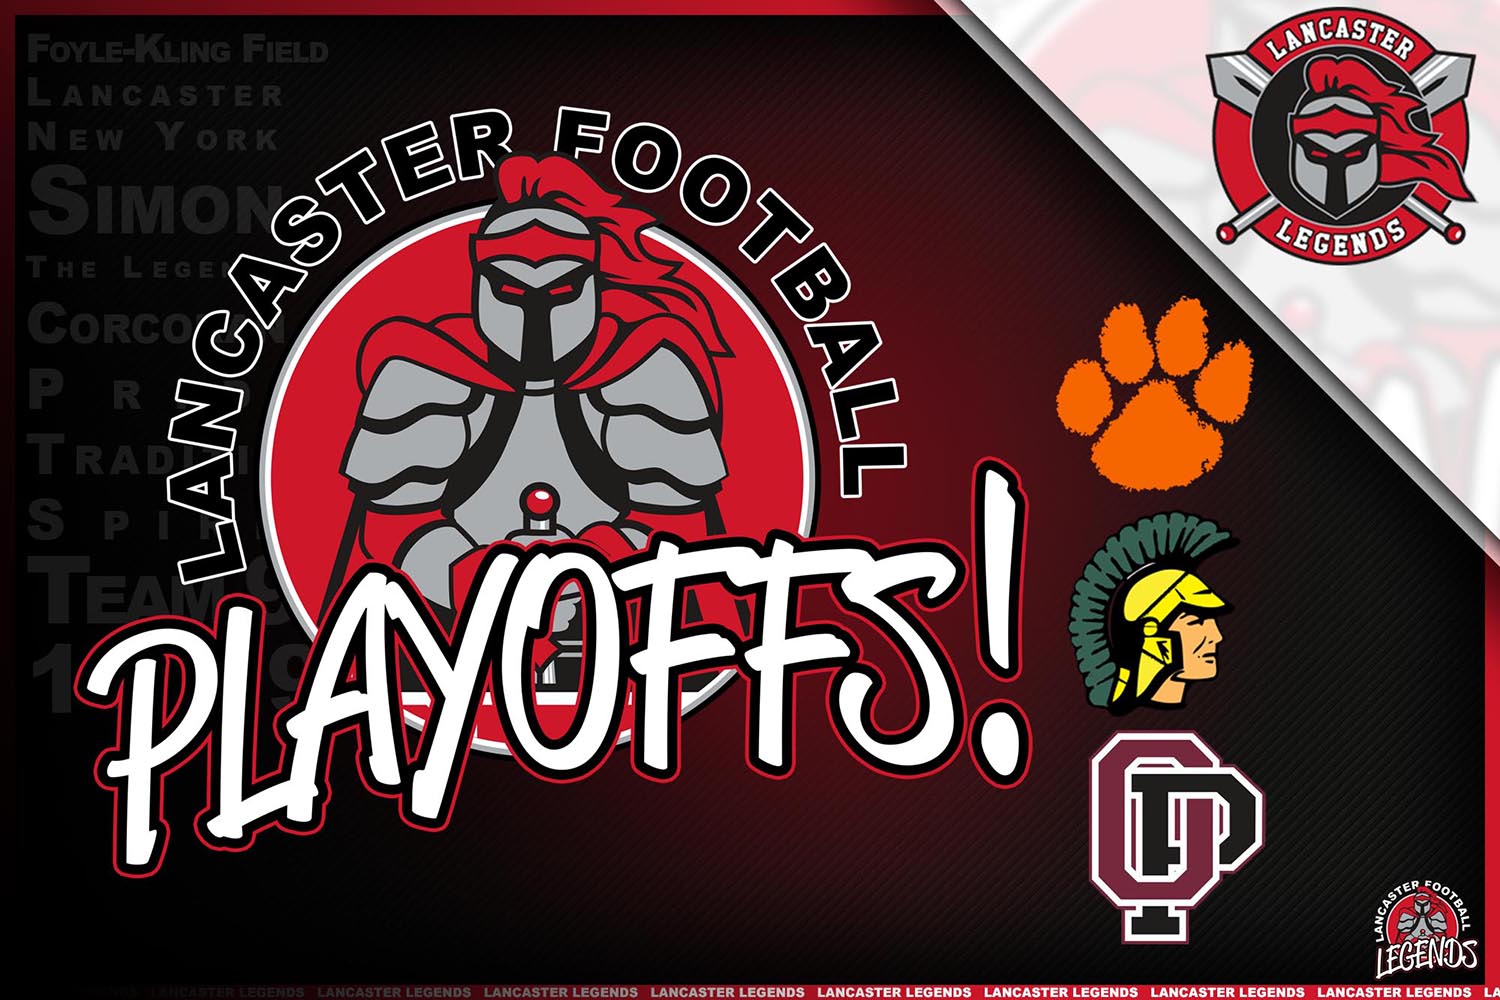 Lancaster is in the Playoffs!